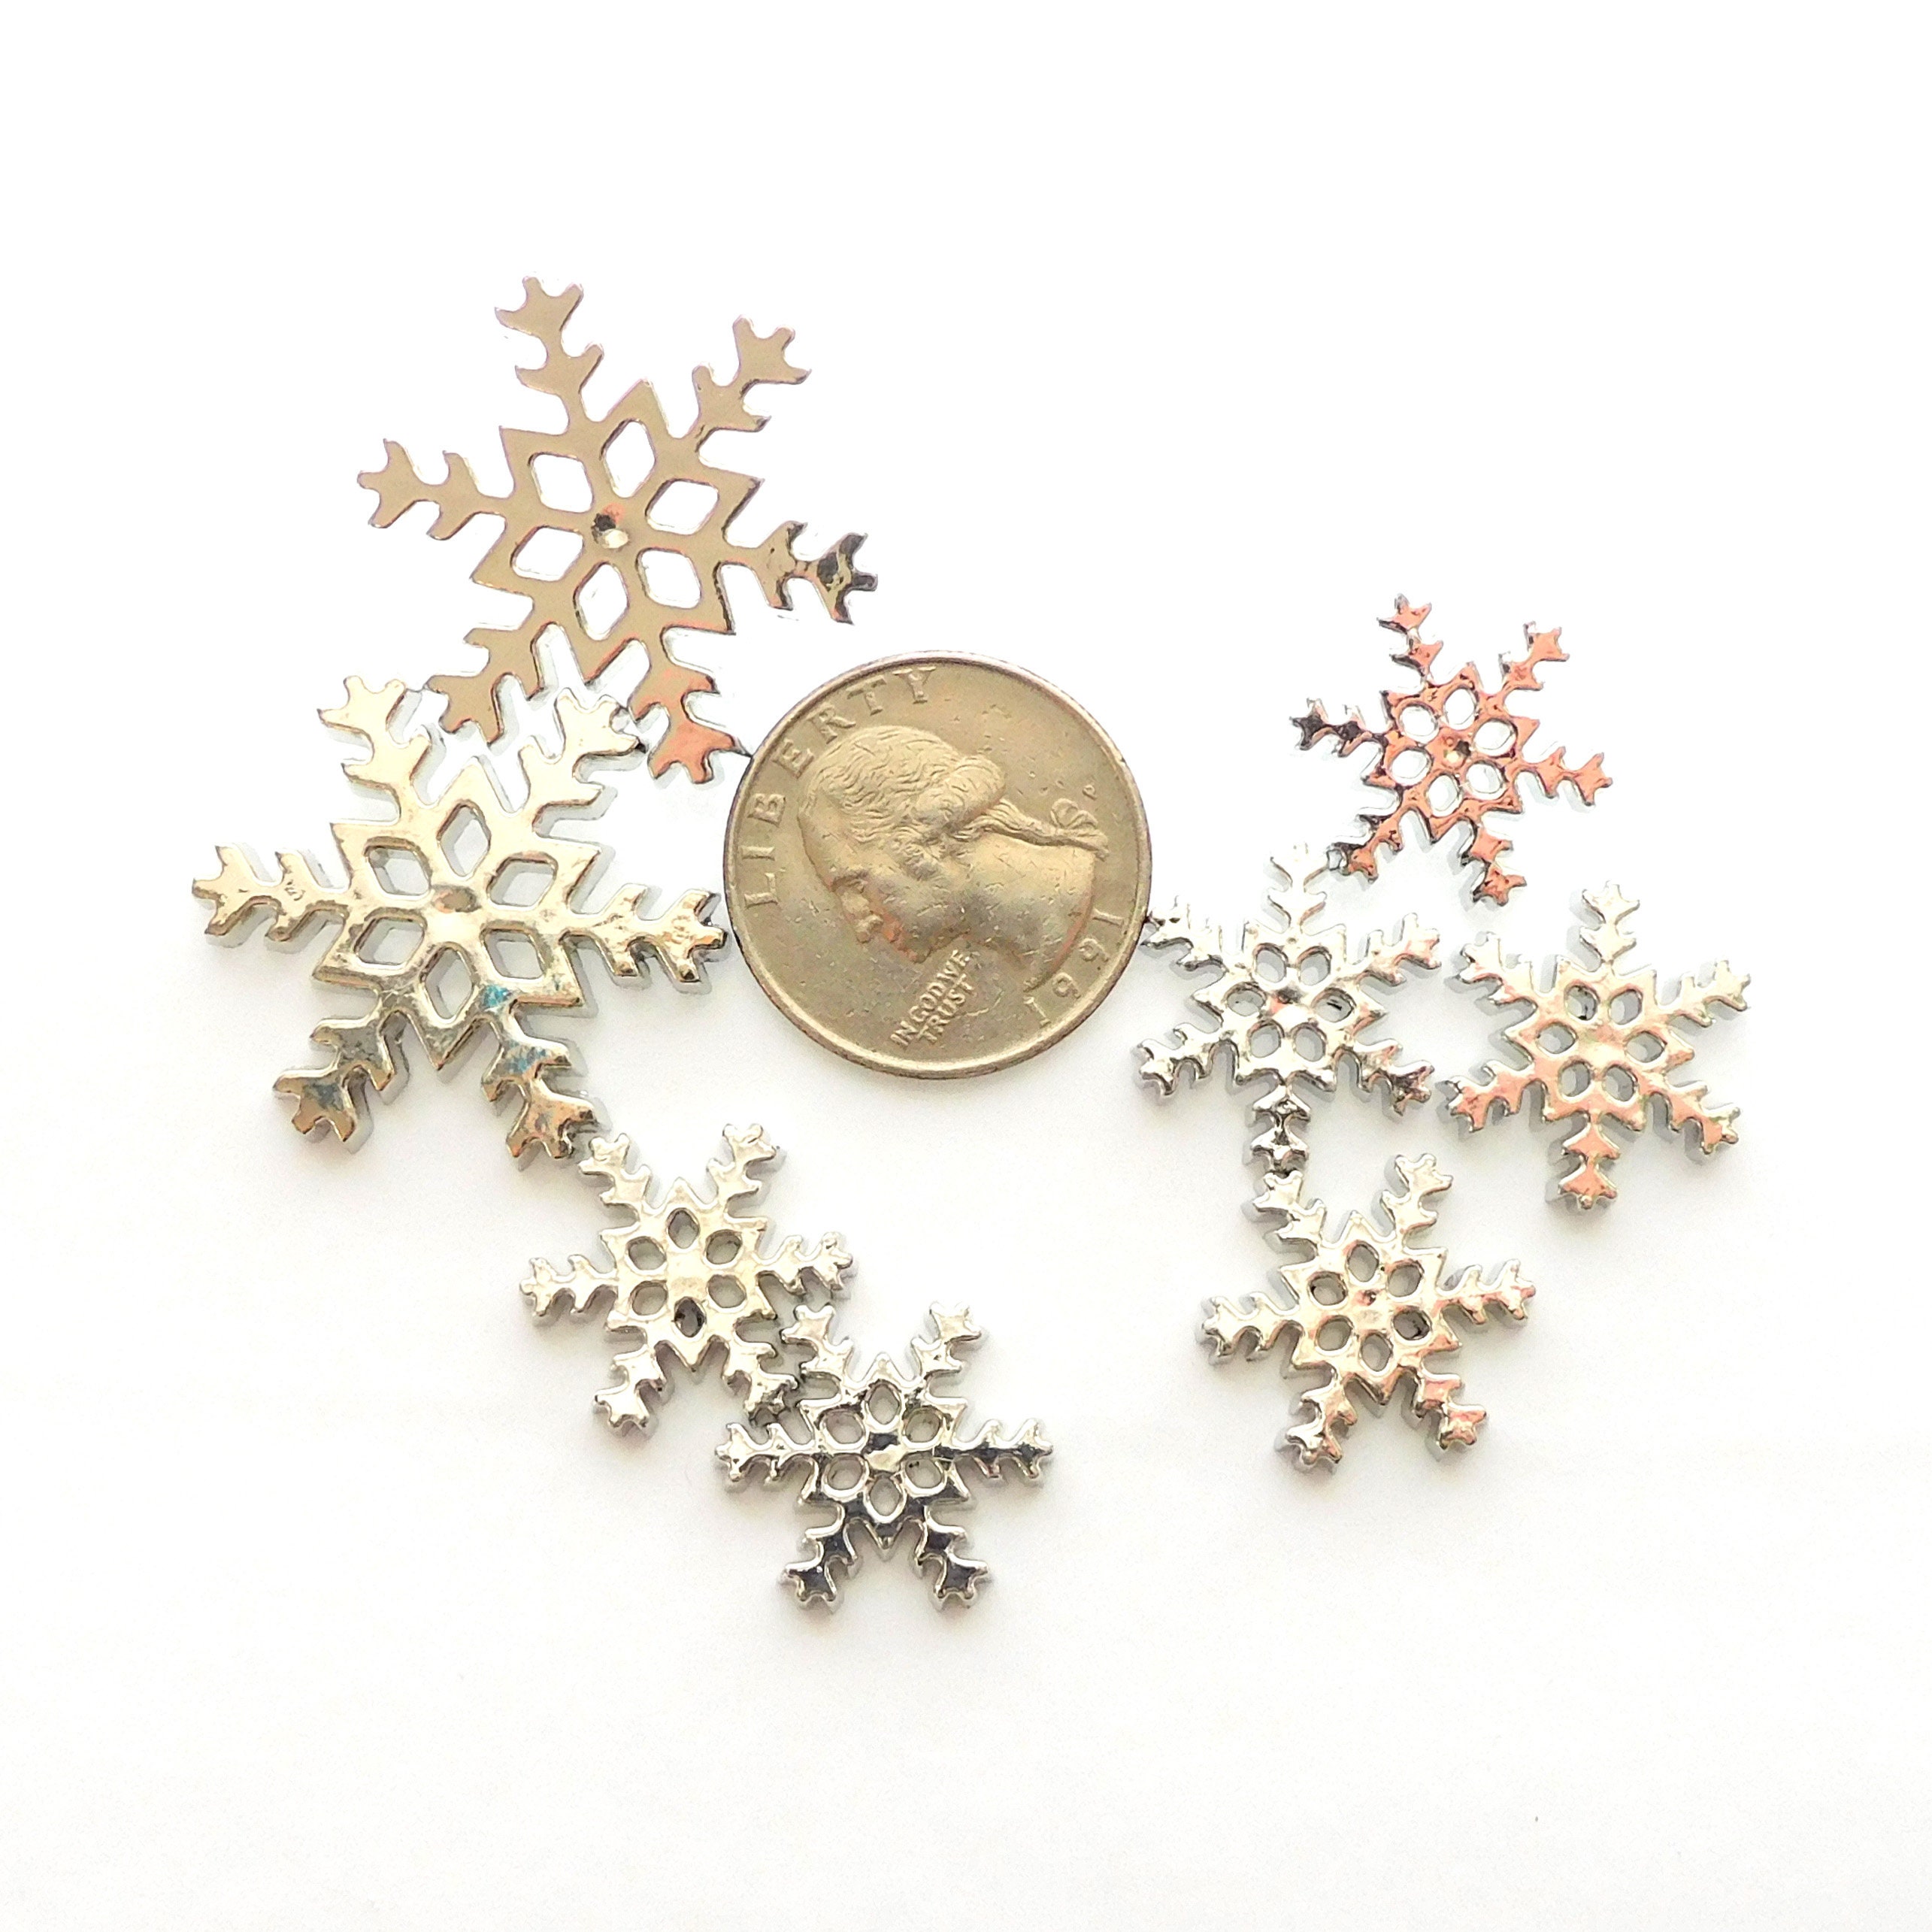 Silver Snowflake Buttons by Flair Originals/ Novelty Embellishments Winter  Christmas Snowy Holiday Crafts Hair Bow Blumenthal Lansing 